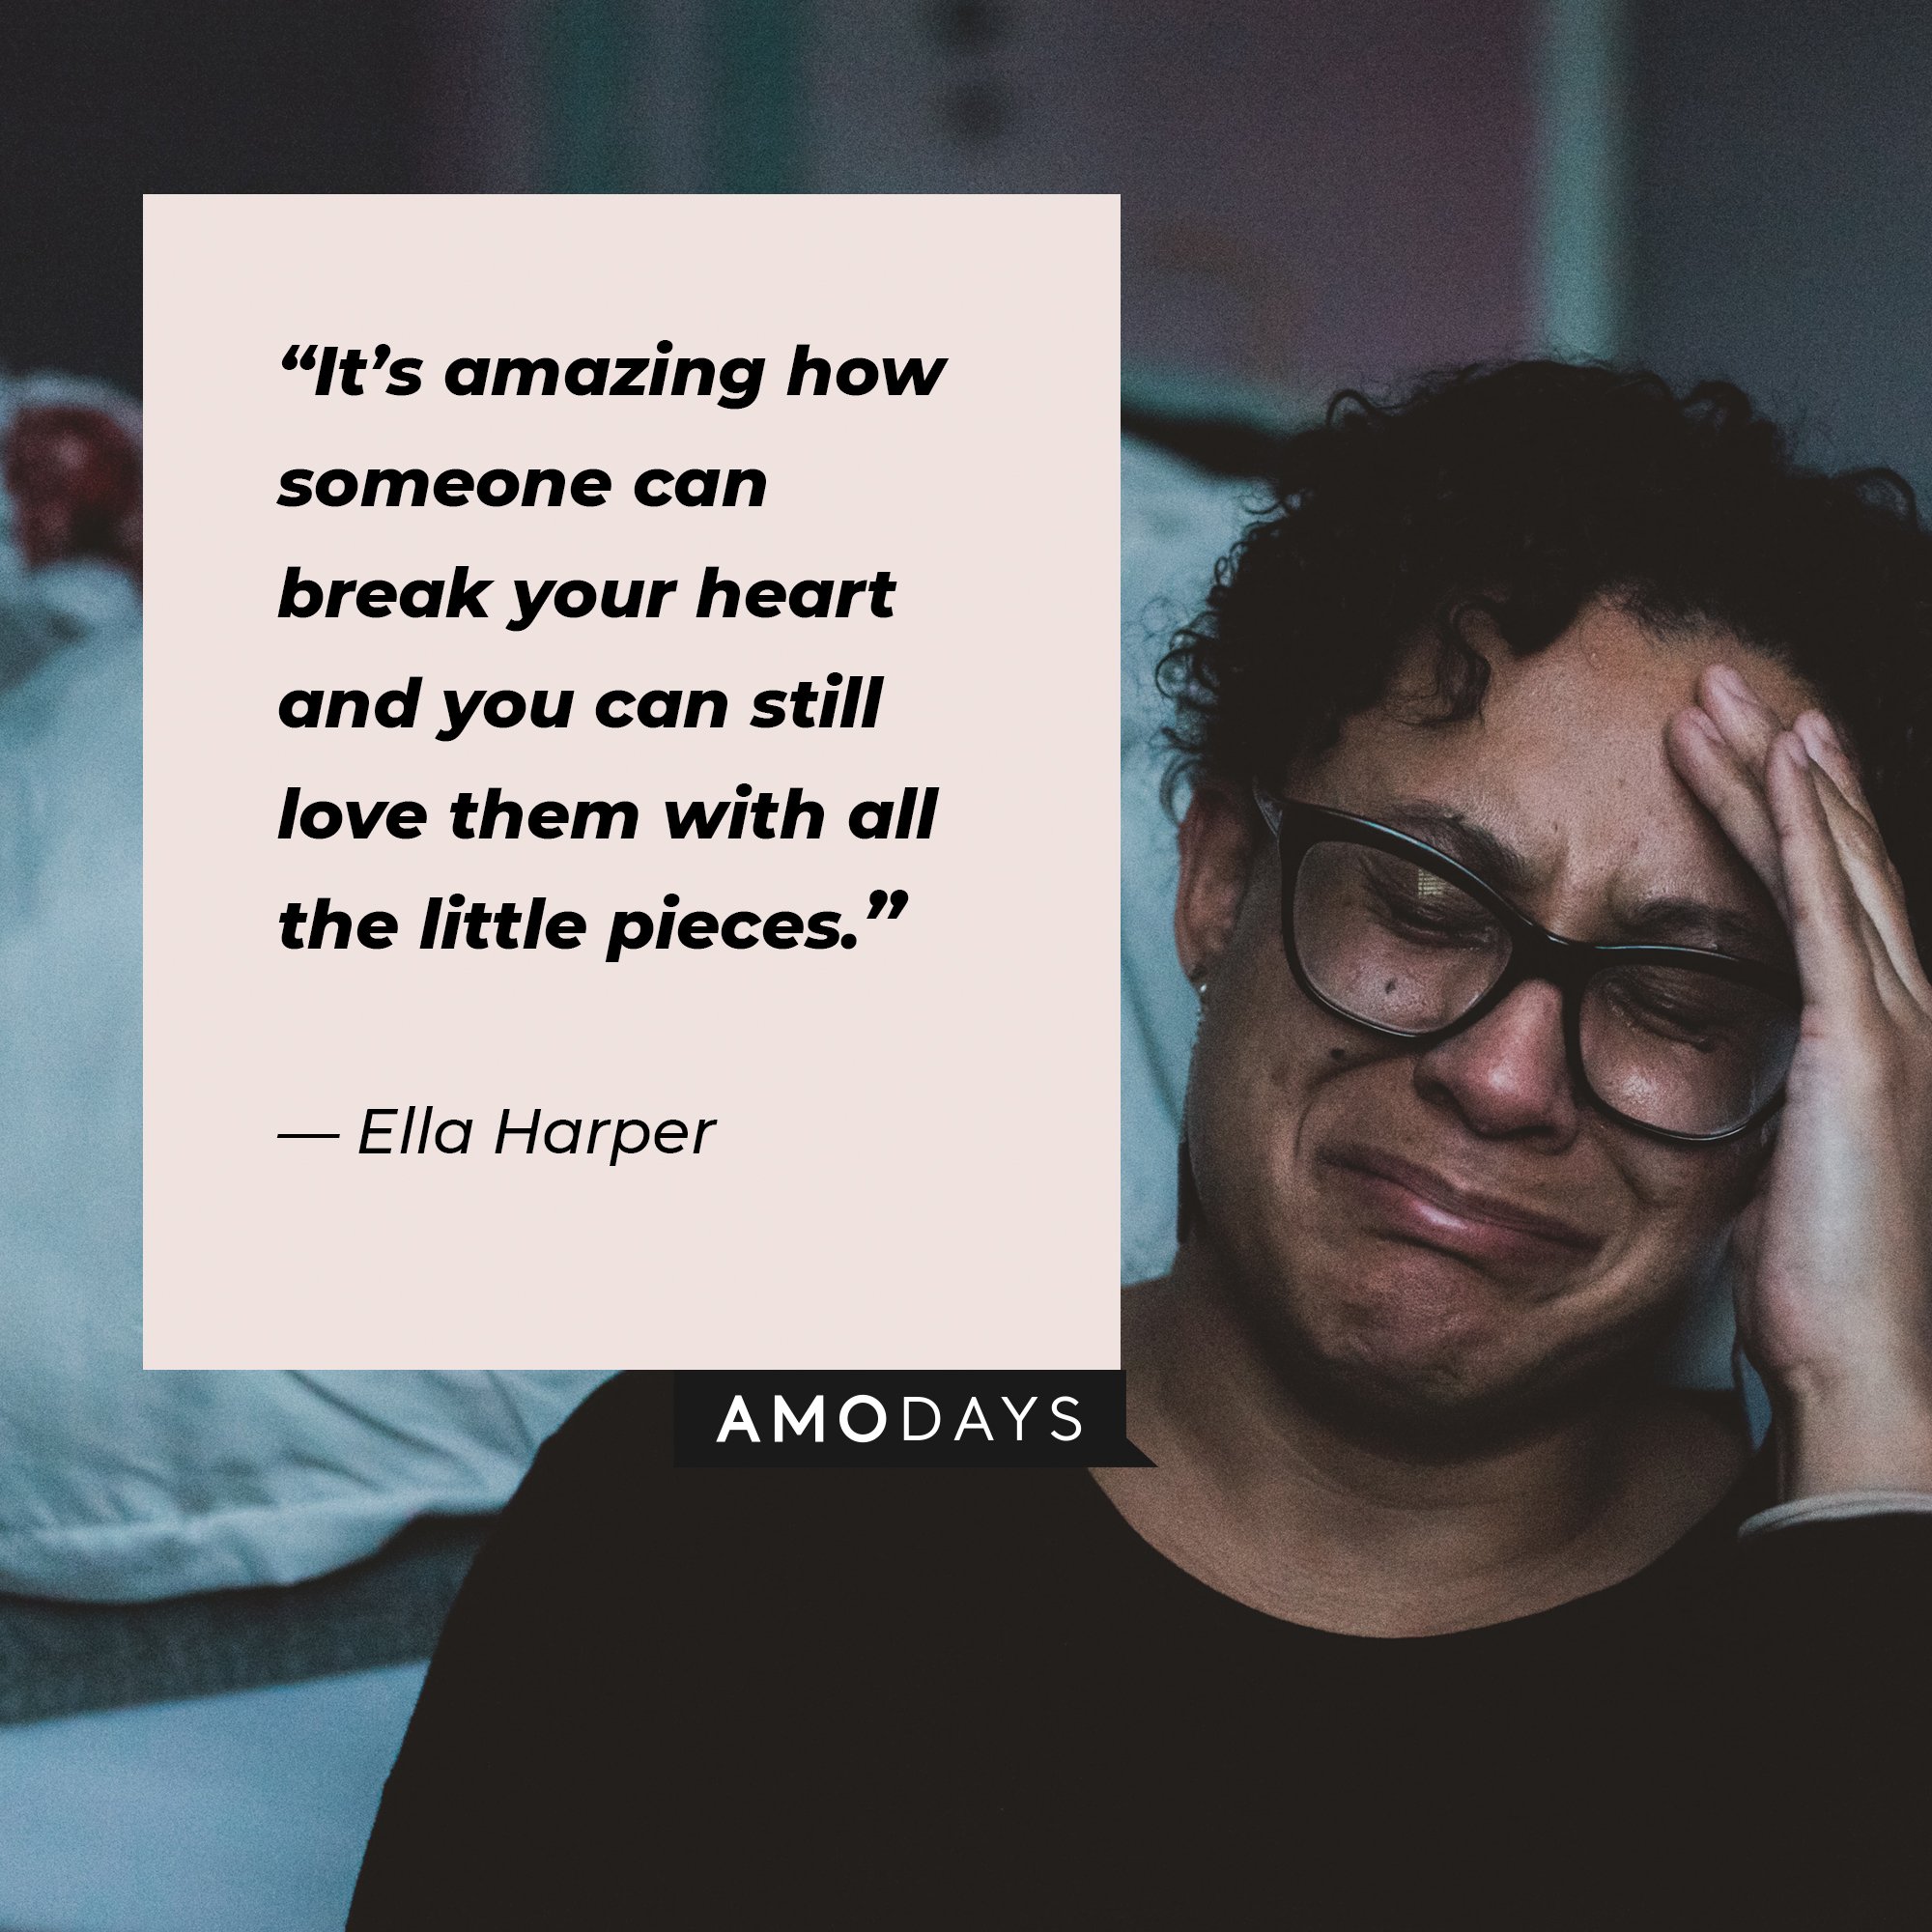 Ella Harper’s quote: “It’s amazing how someone can break your heart and you can still love them with all the little pieces.” | Image: AmoDays